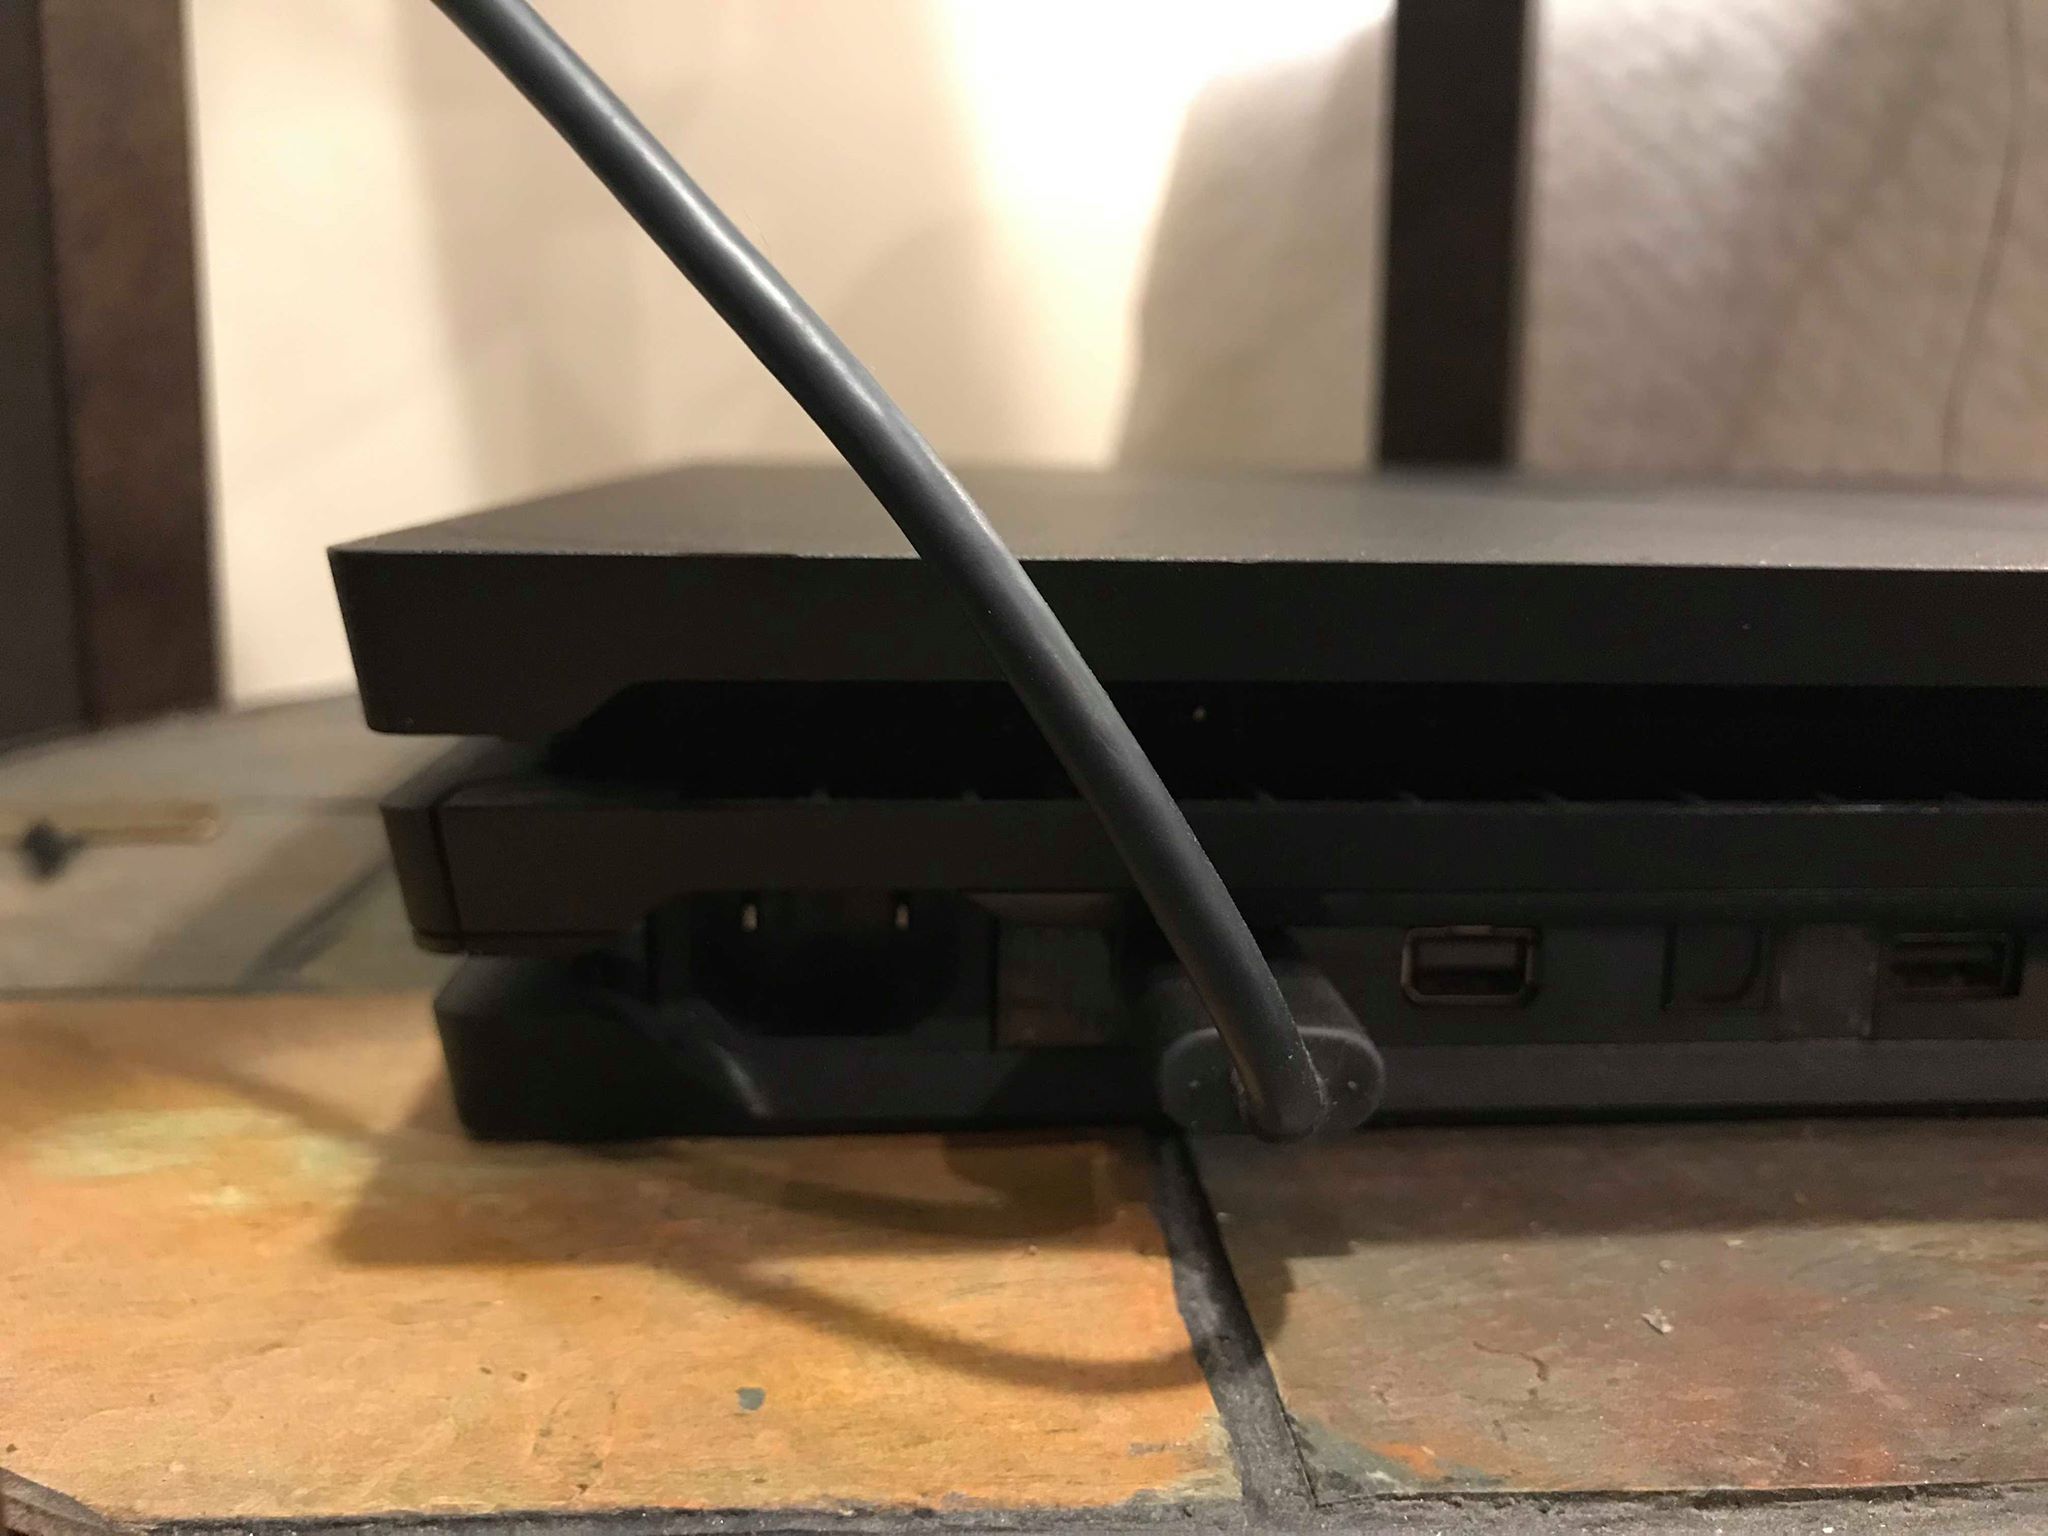 PlayStation 4 power outlet